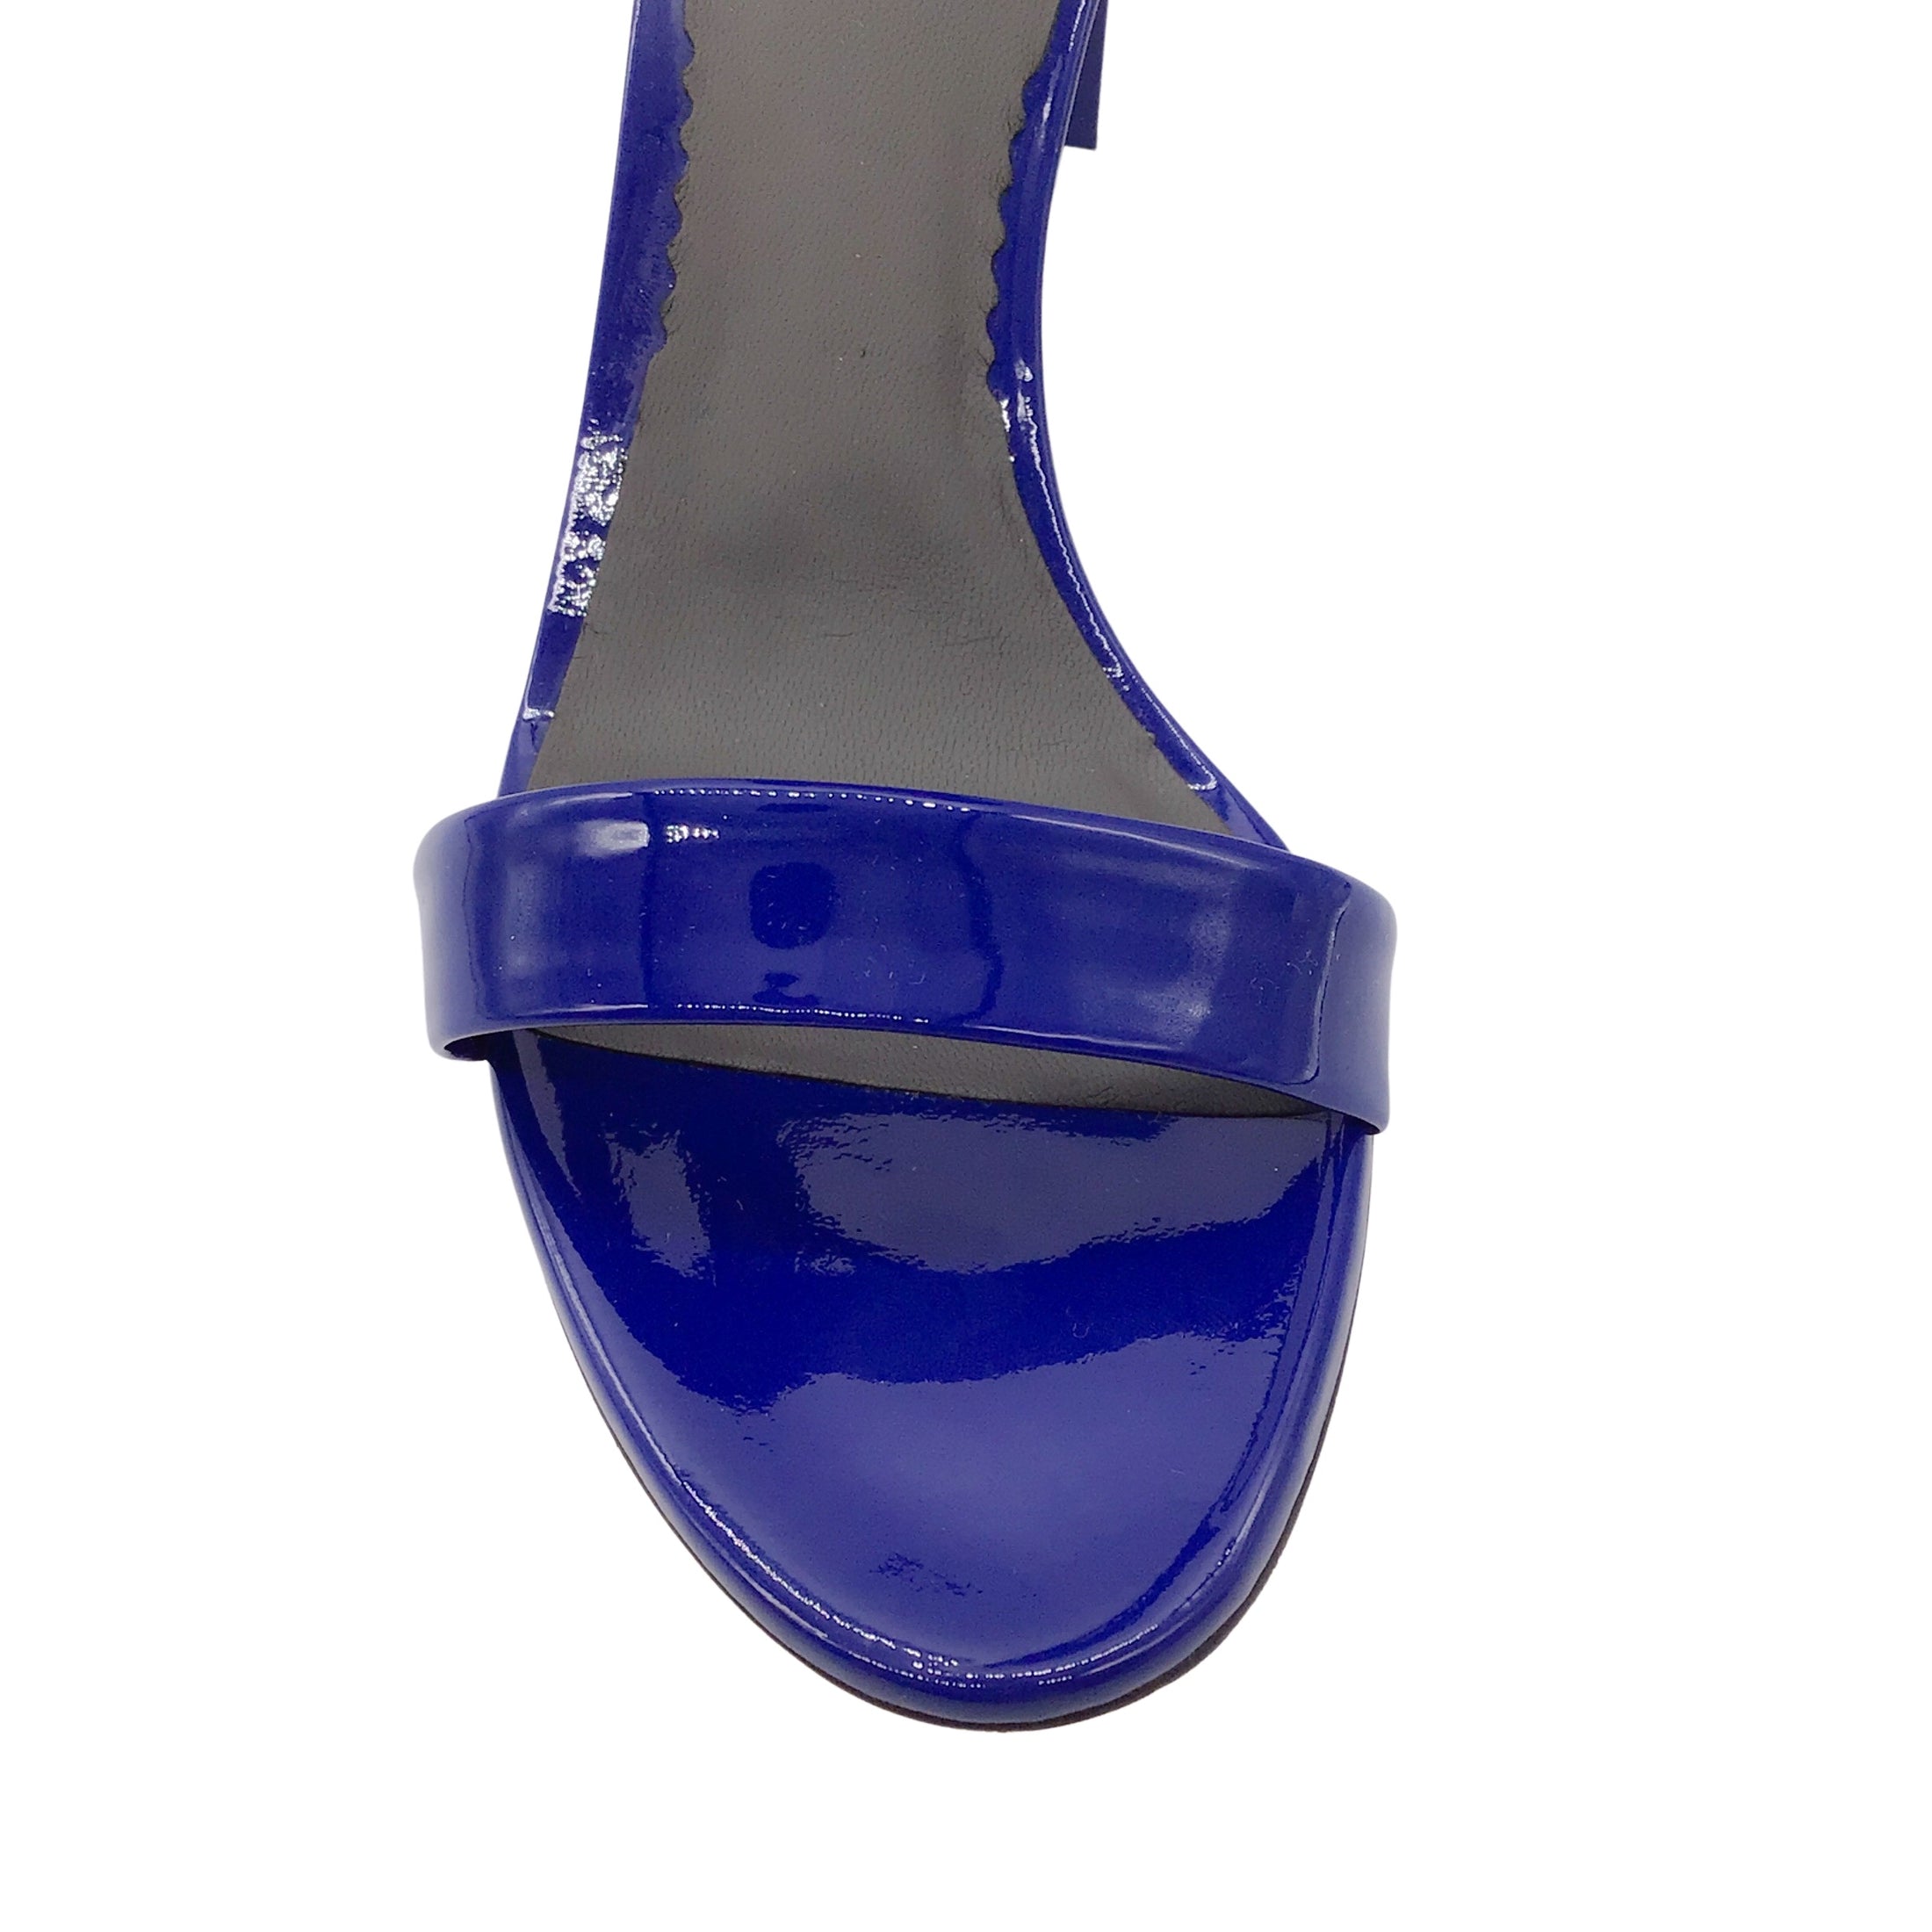 Reed Krakoff Blue Patent Leather and Suede Block Heel Sandals